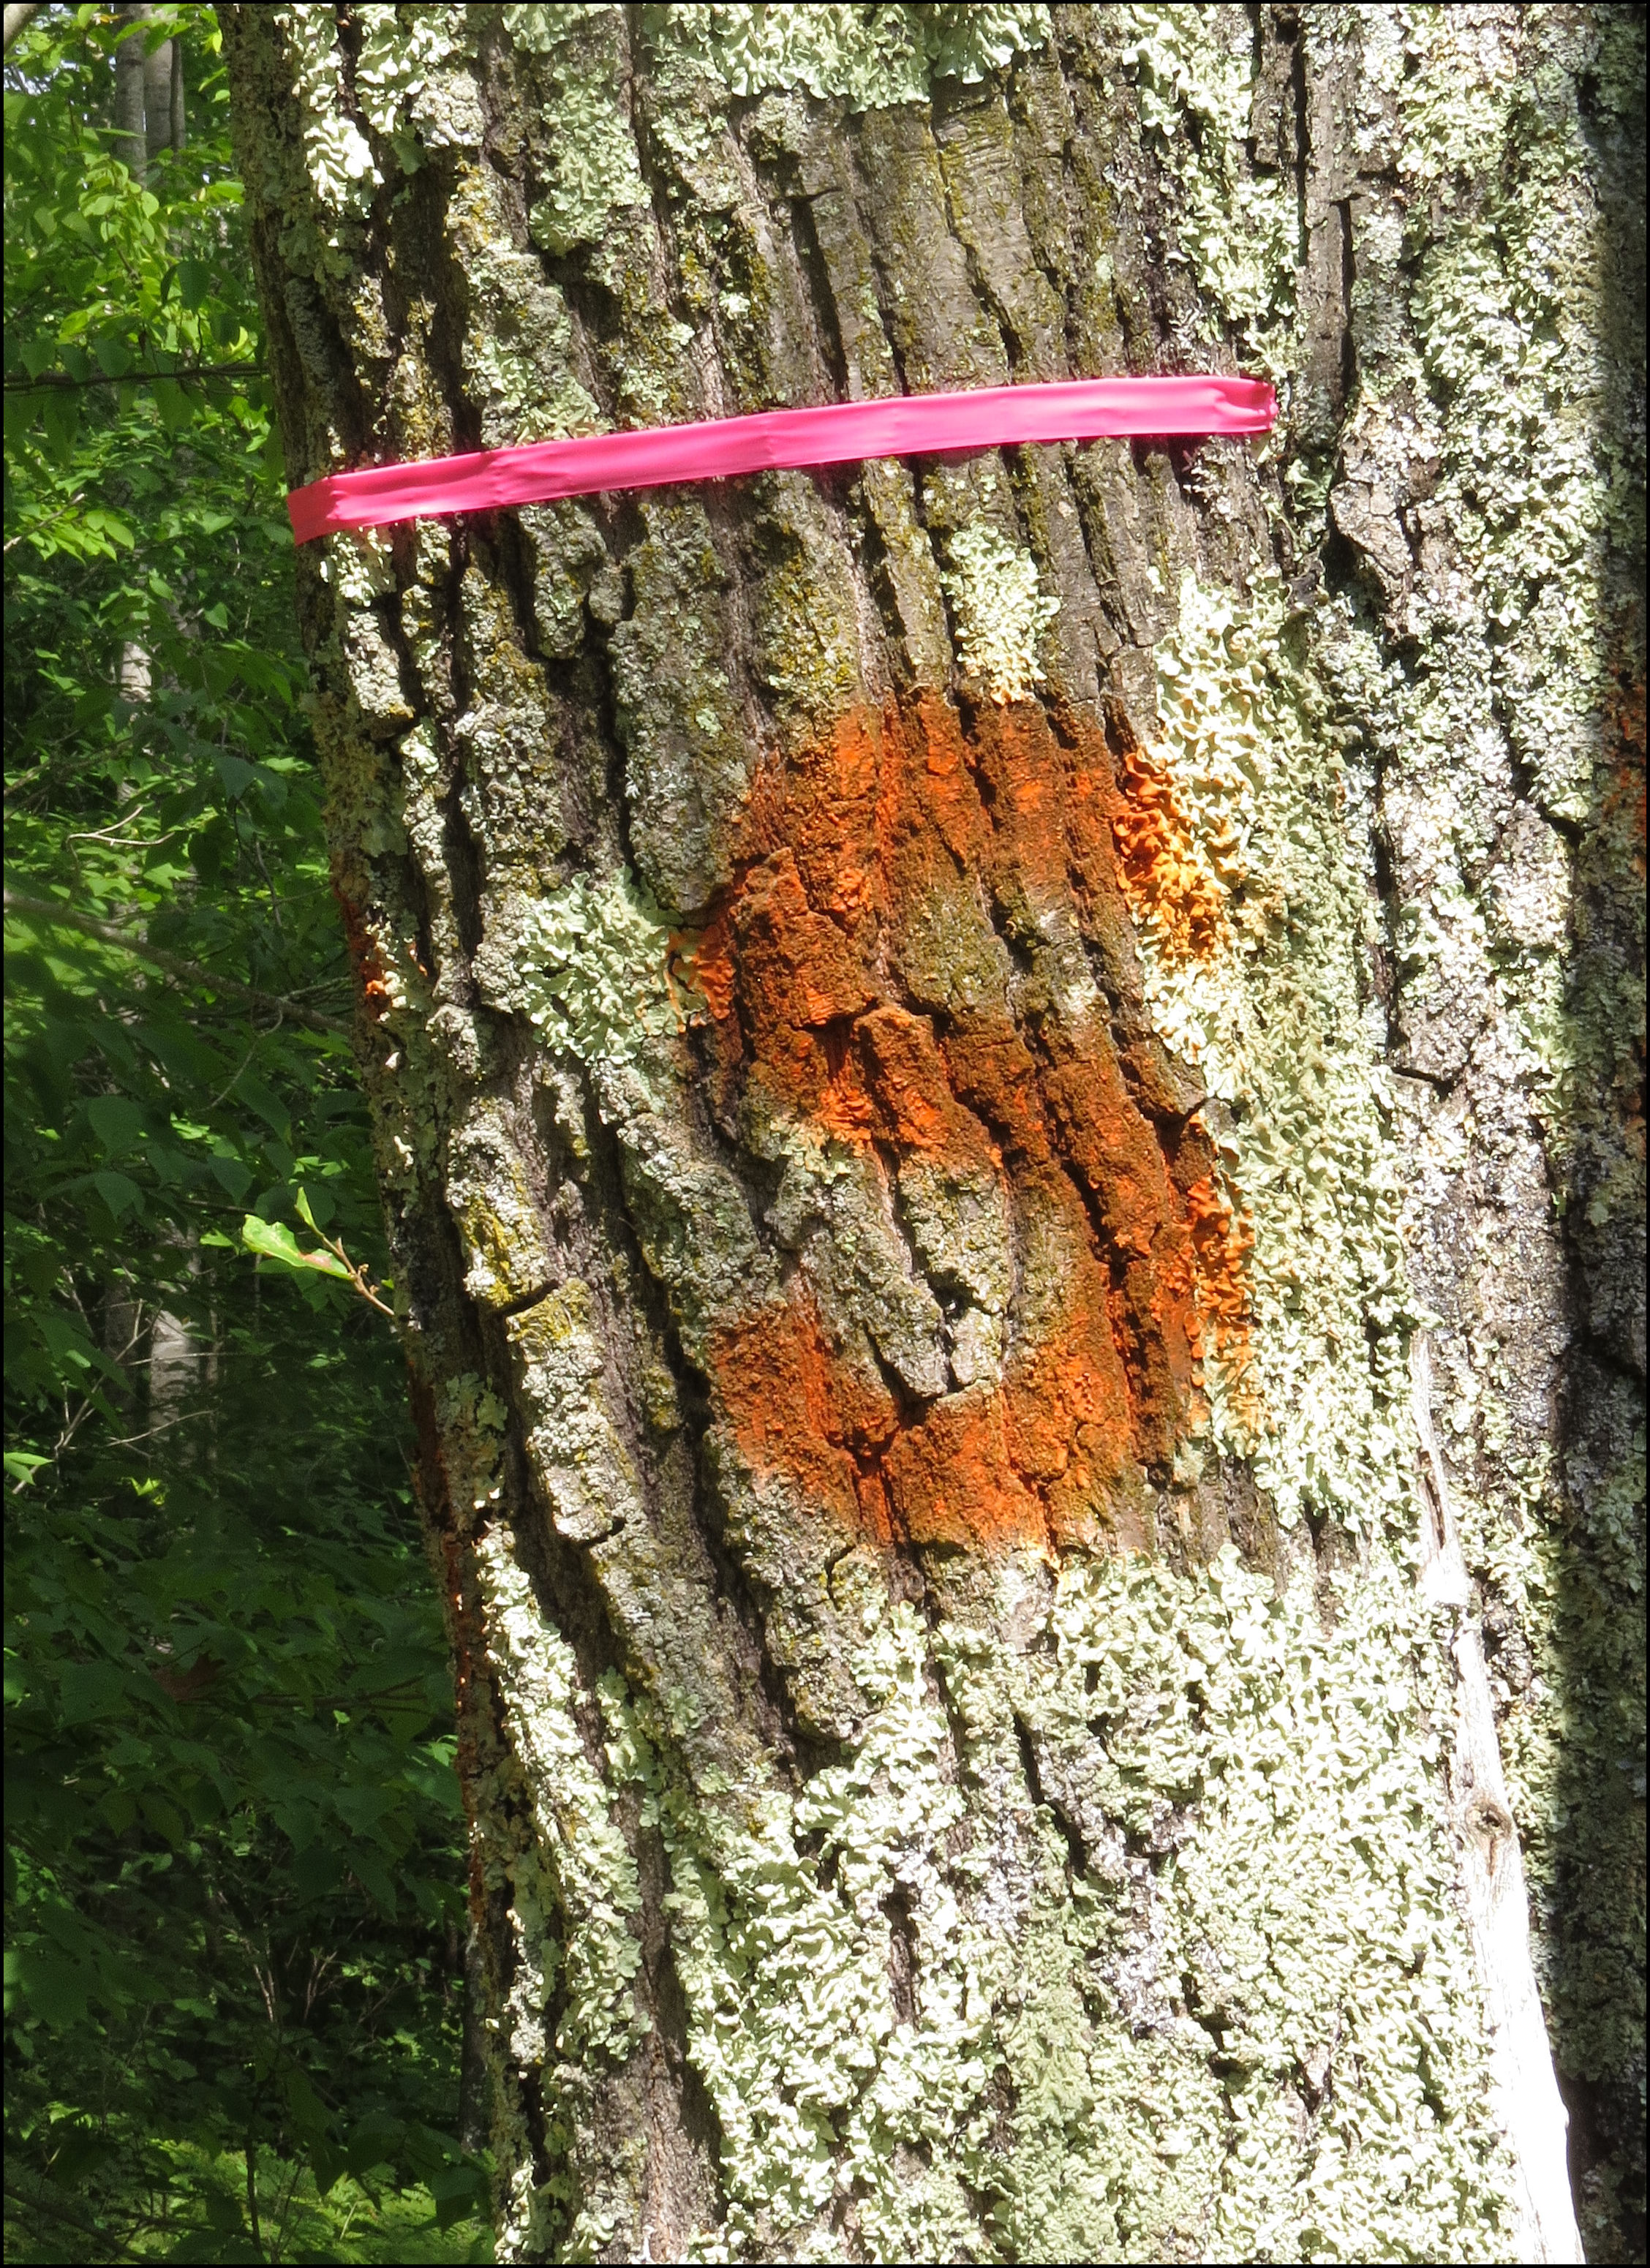 A potential spore producing tree marked for special handling.  Photo by Bill Cook